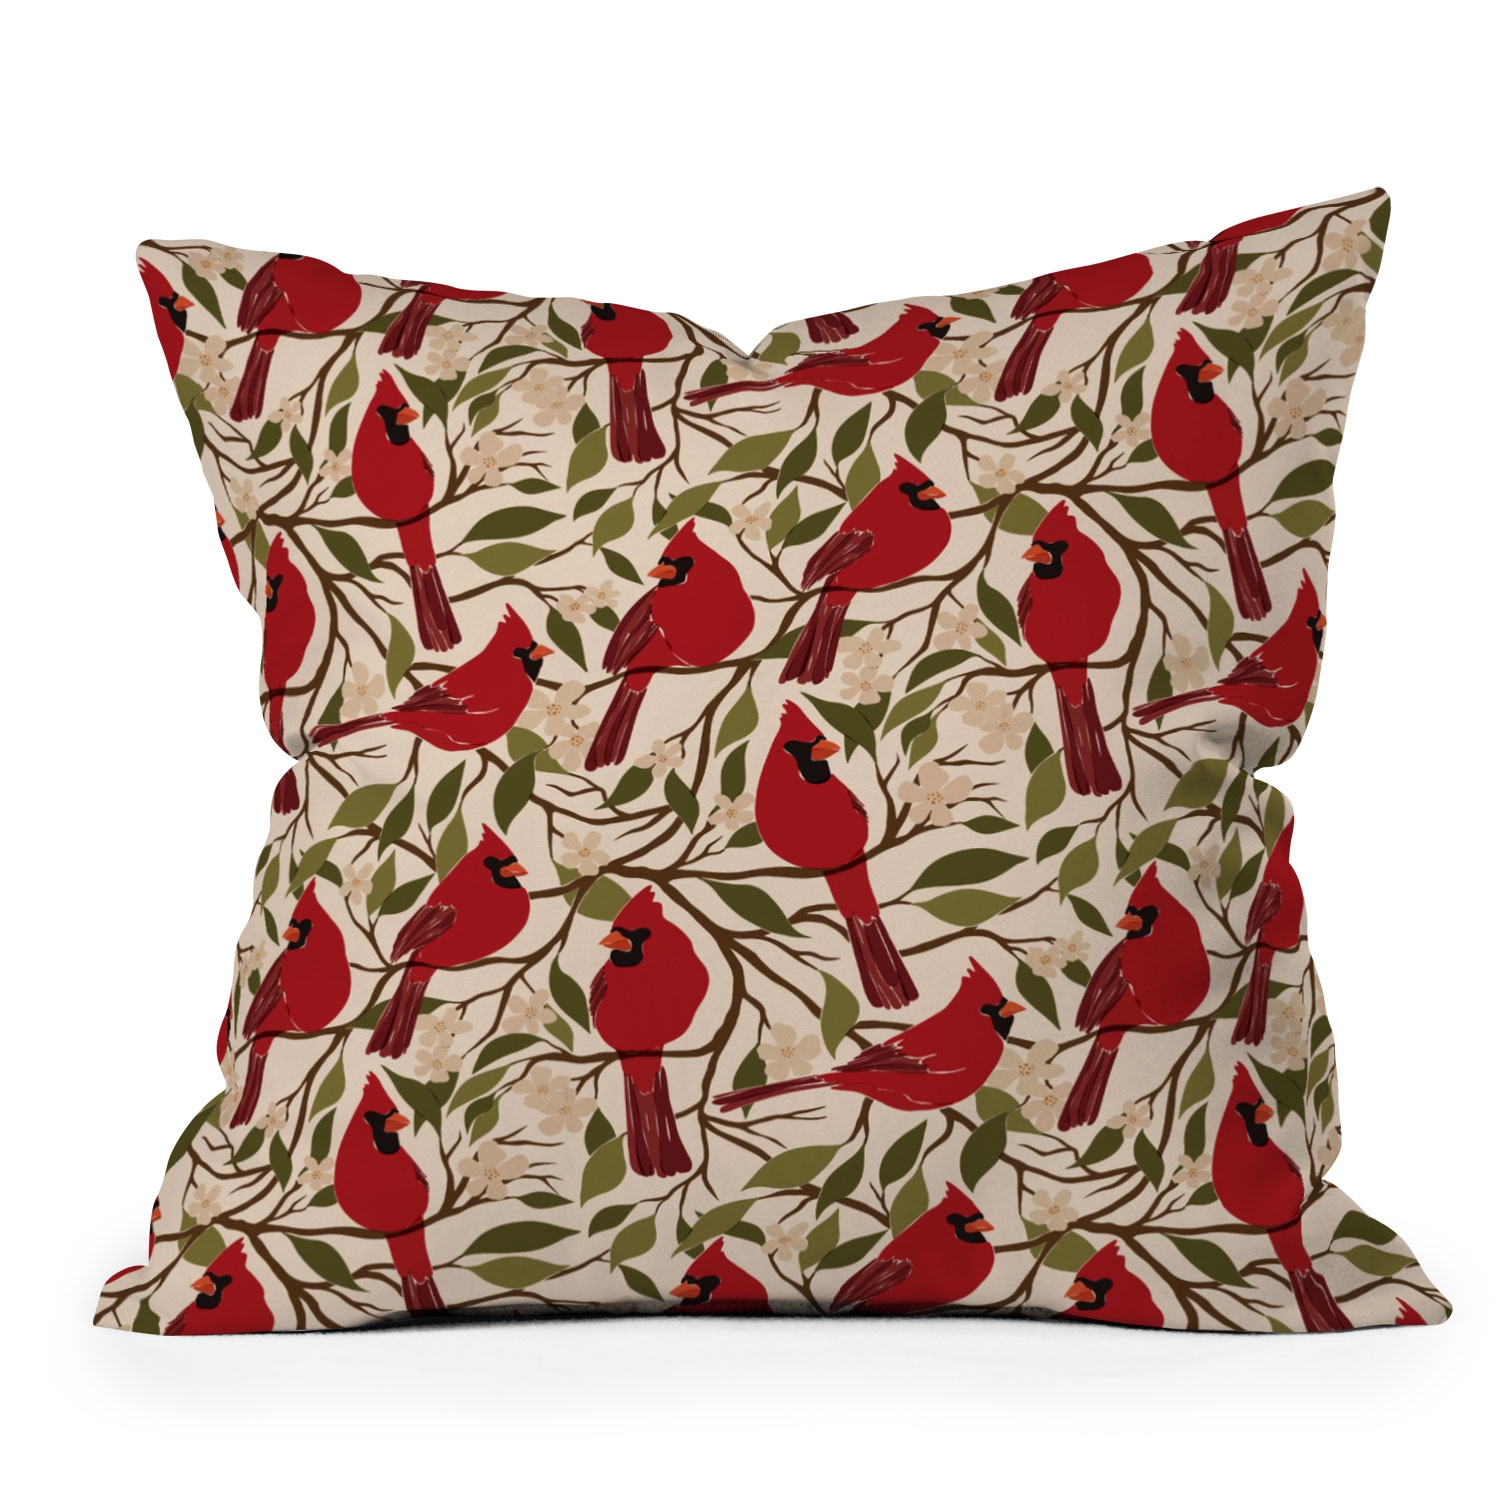 Cardinals On Blossoming Tree by Cuss Yeah Designs - Outdoor Throw Pillow 18" x 18" - Image 3